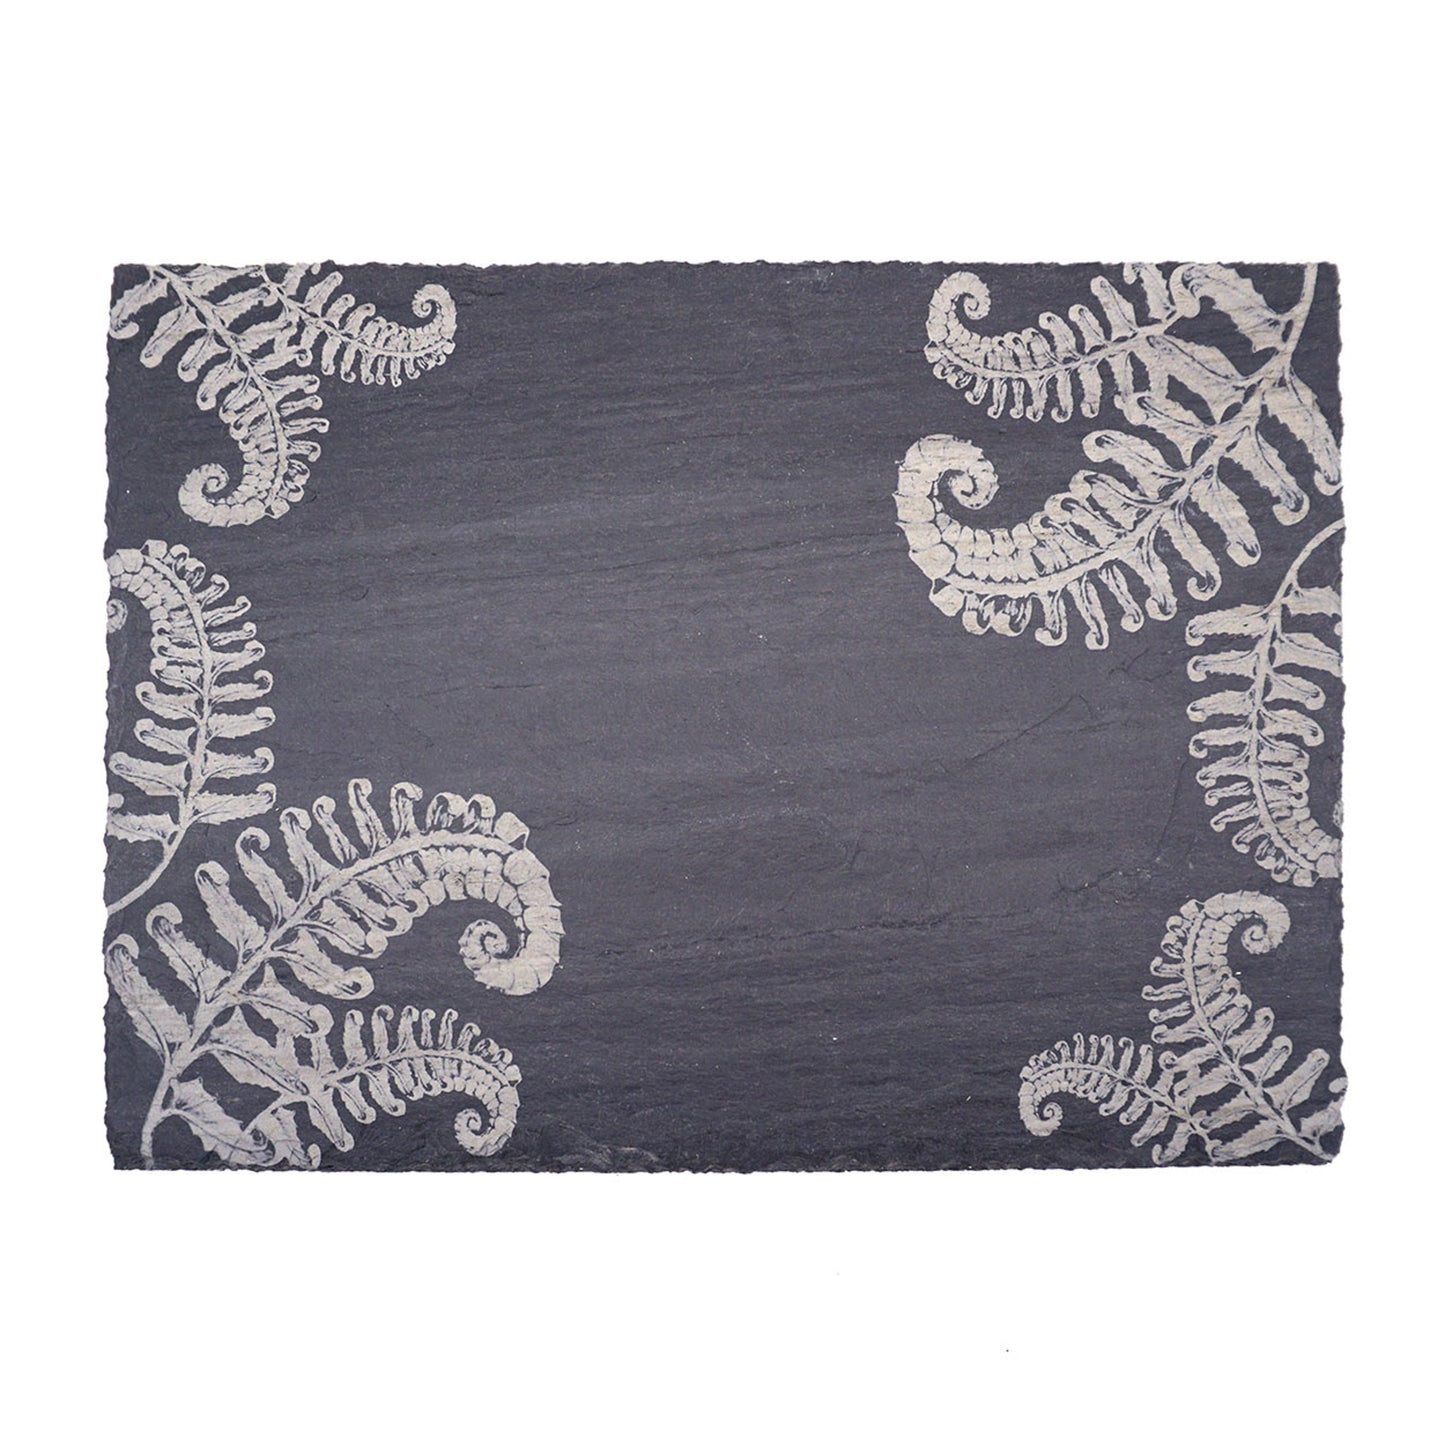 Laura Zindel Slate Rectangle Serving Tray - More designs available